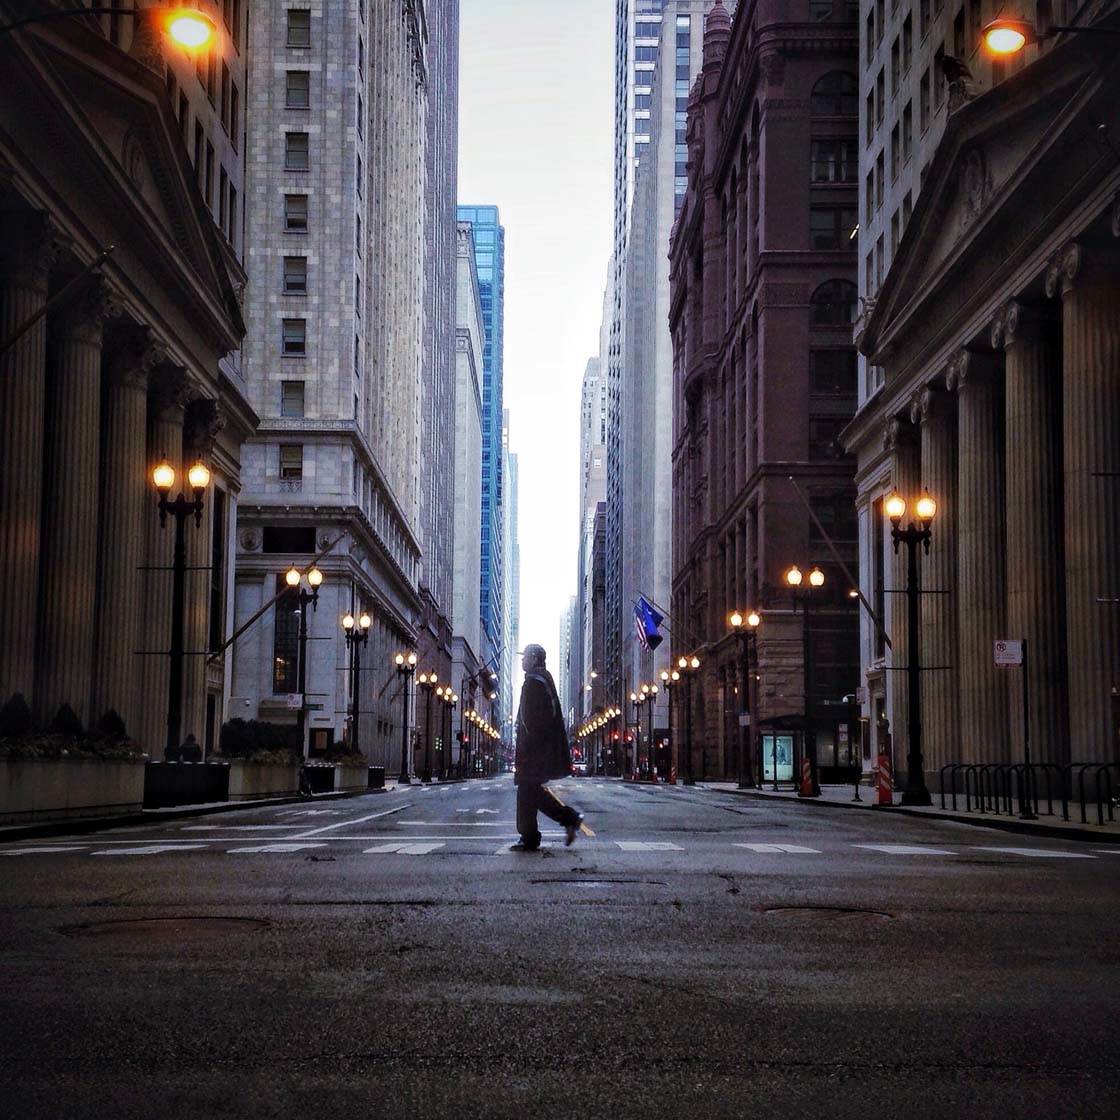 iPhone Street Photography Tips 11